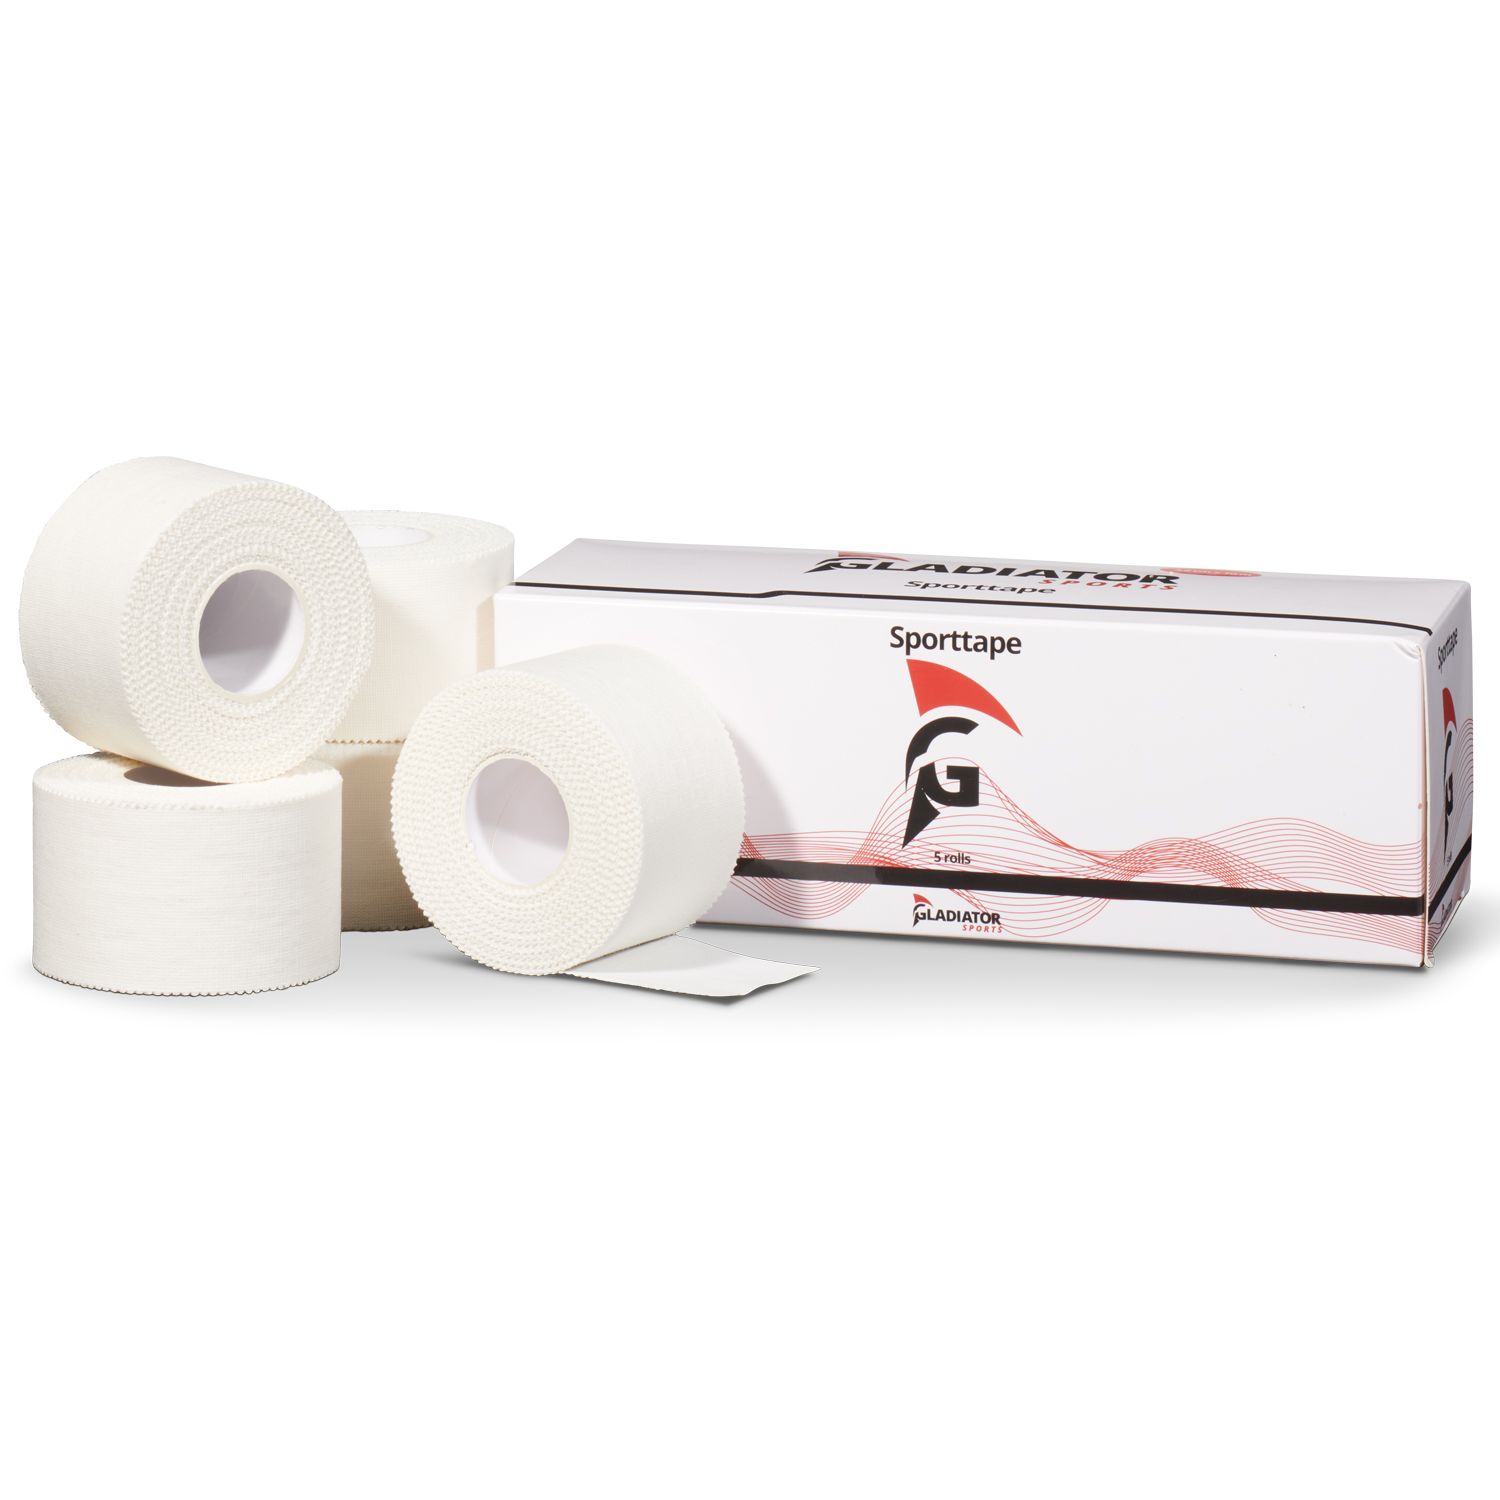 Overview of all sports tape